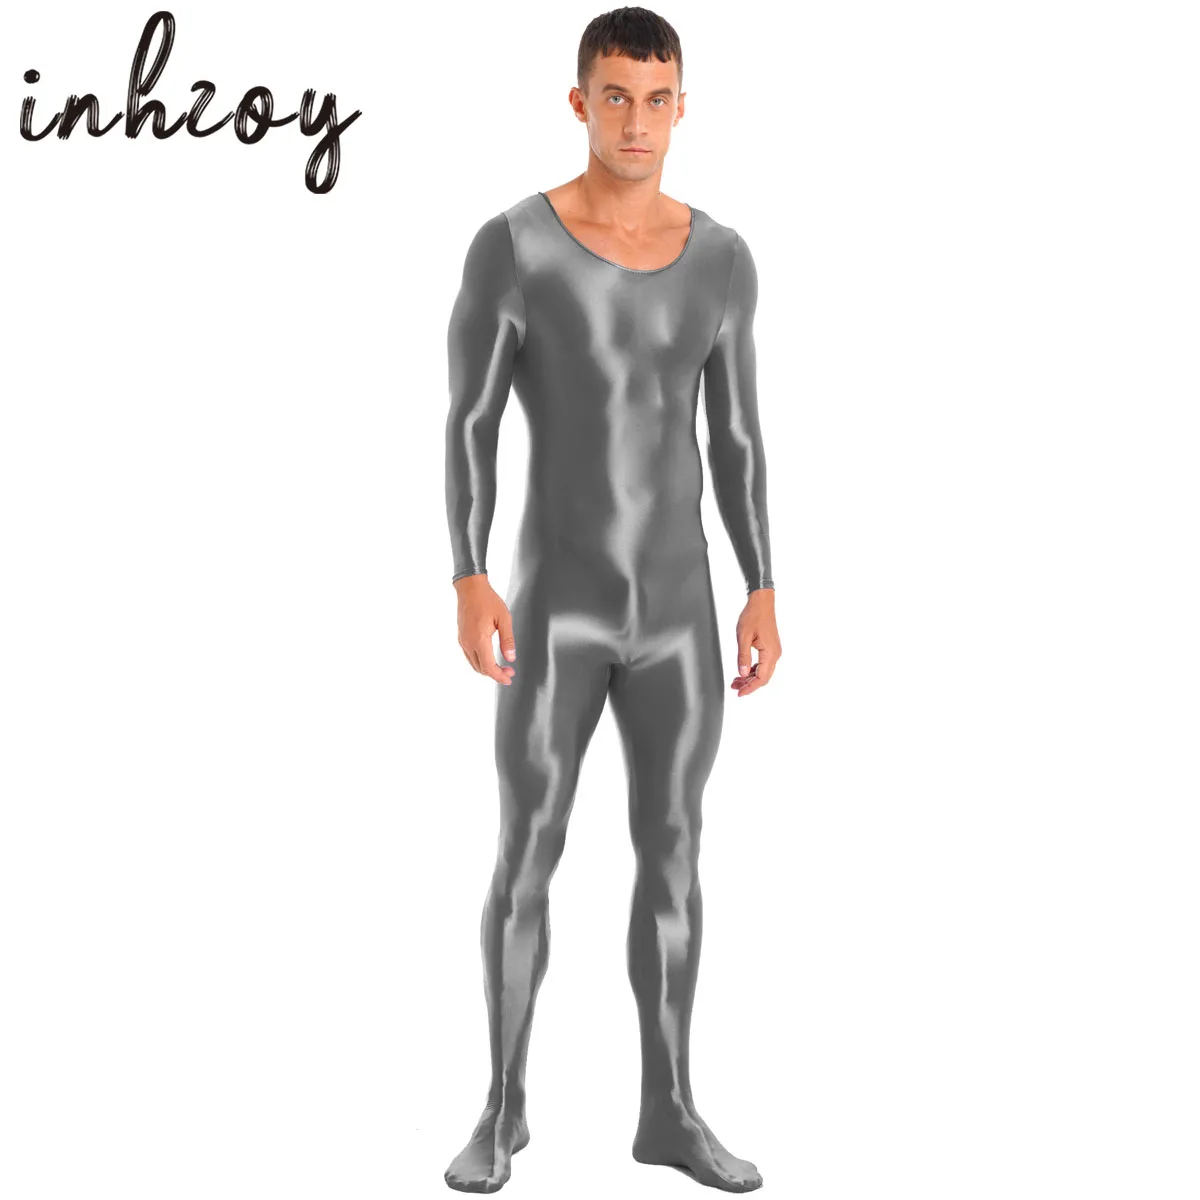 Men Glossy Smooth Bodystocking Oil Shiny Long Sleeve One-Piece Bodysuit Jumpsuit Gym Fitness Full Body Leotard Swimwear Swimsuit one pieces swimsuit plaid open back one piece bathing suit swimwear in multicolor size s